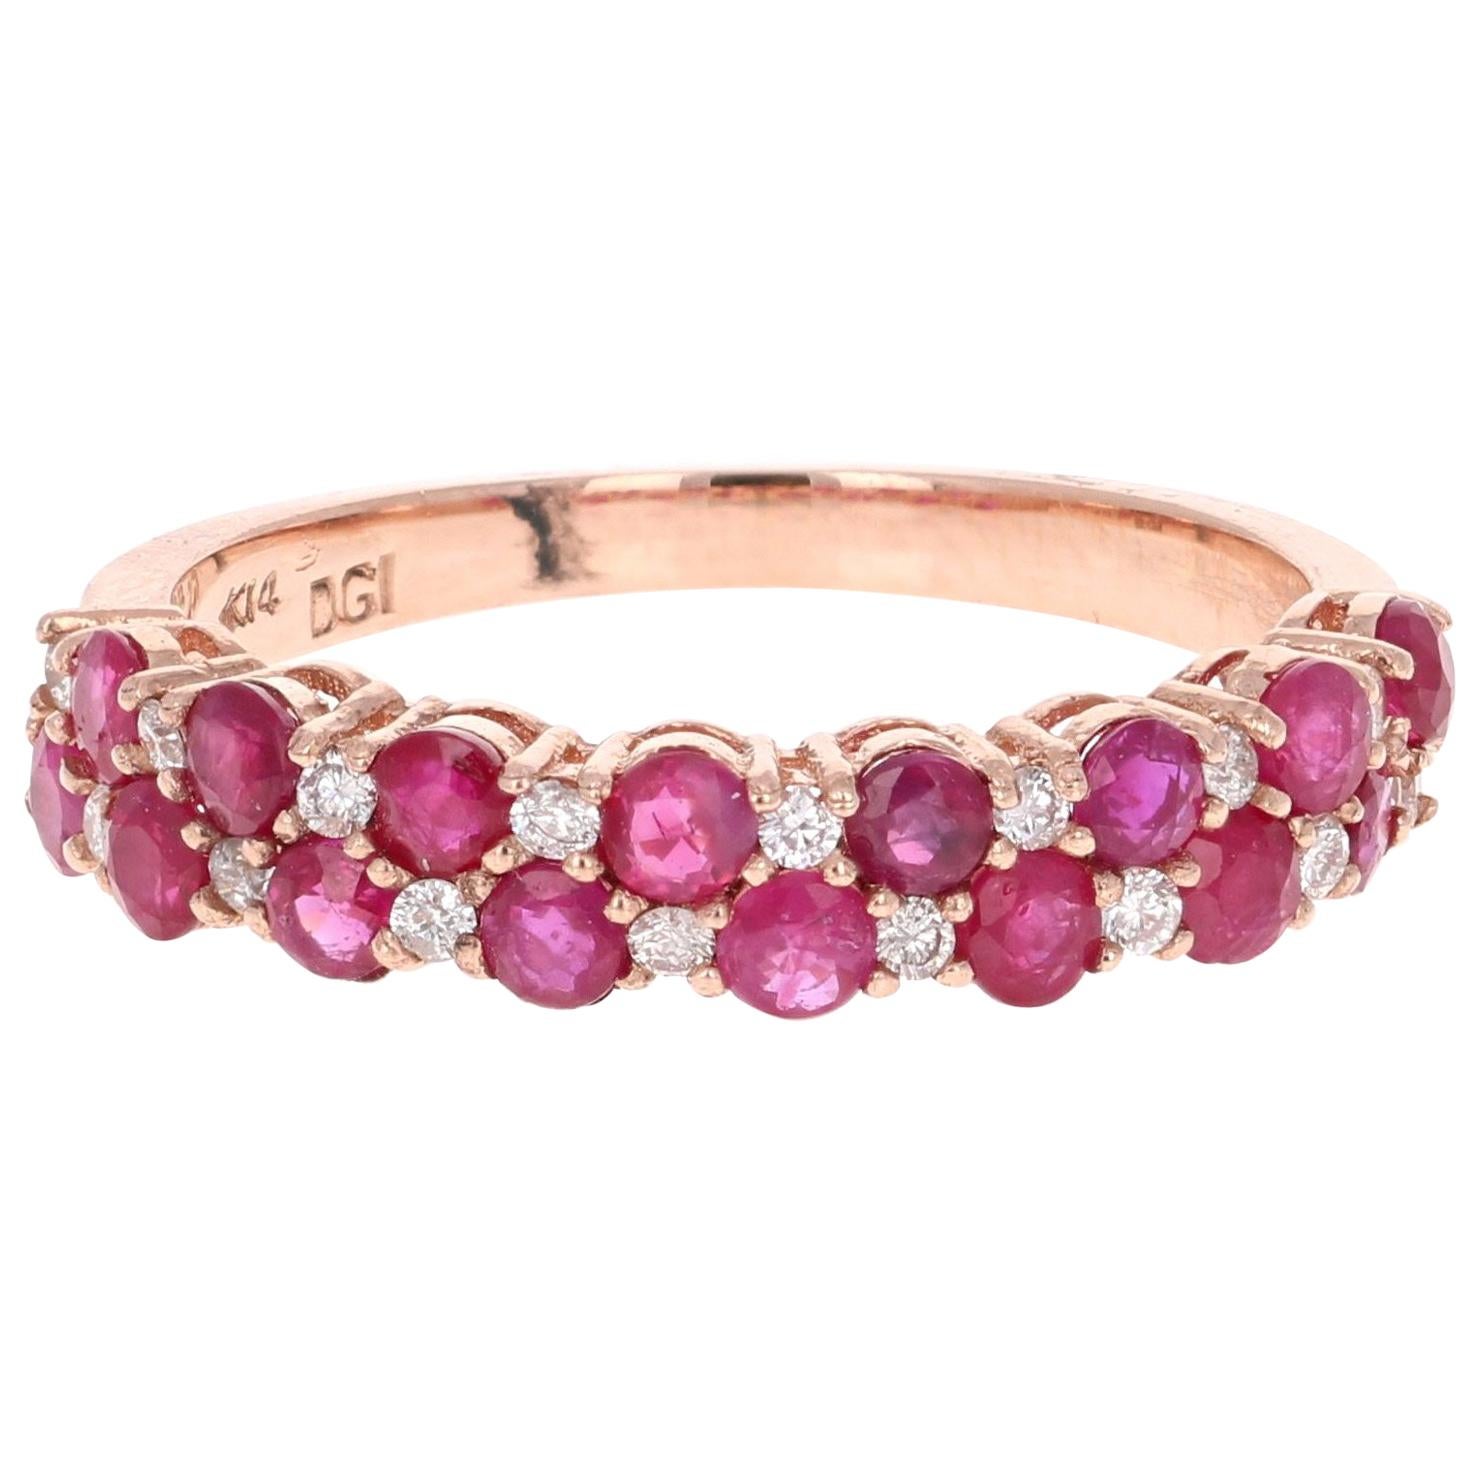 1.90 Carat Diamond Ruby Rose Gold Stackable Bands